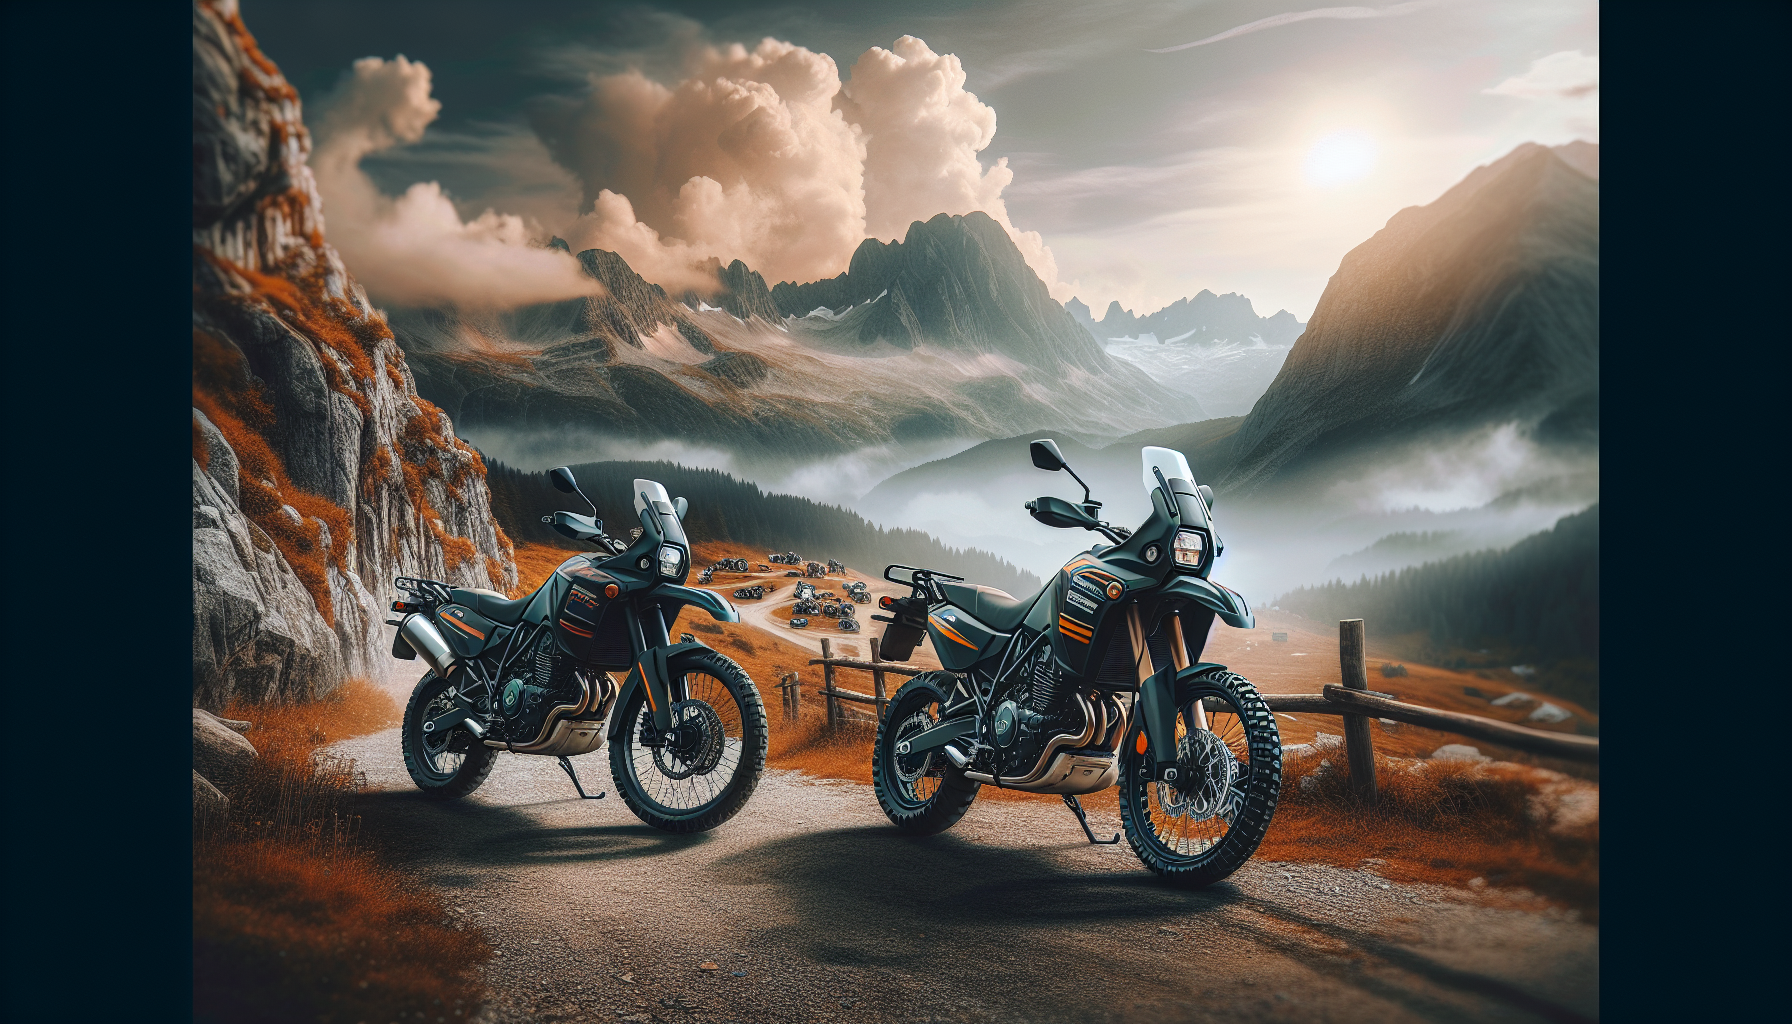 Comparing KLR 650 and DR650: Which Adventure Bike is Right for You?